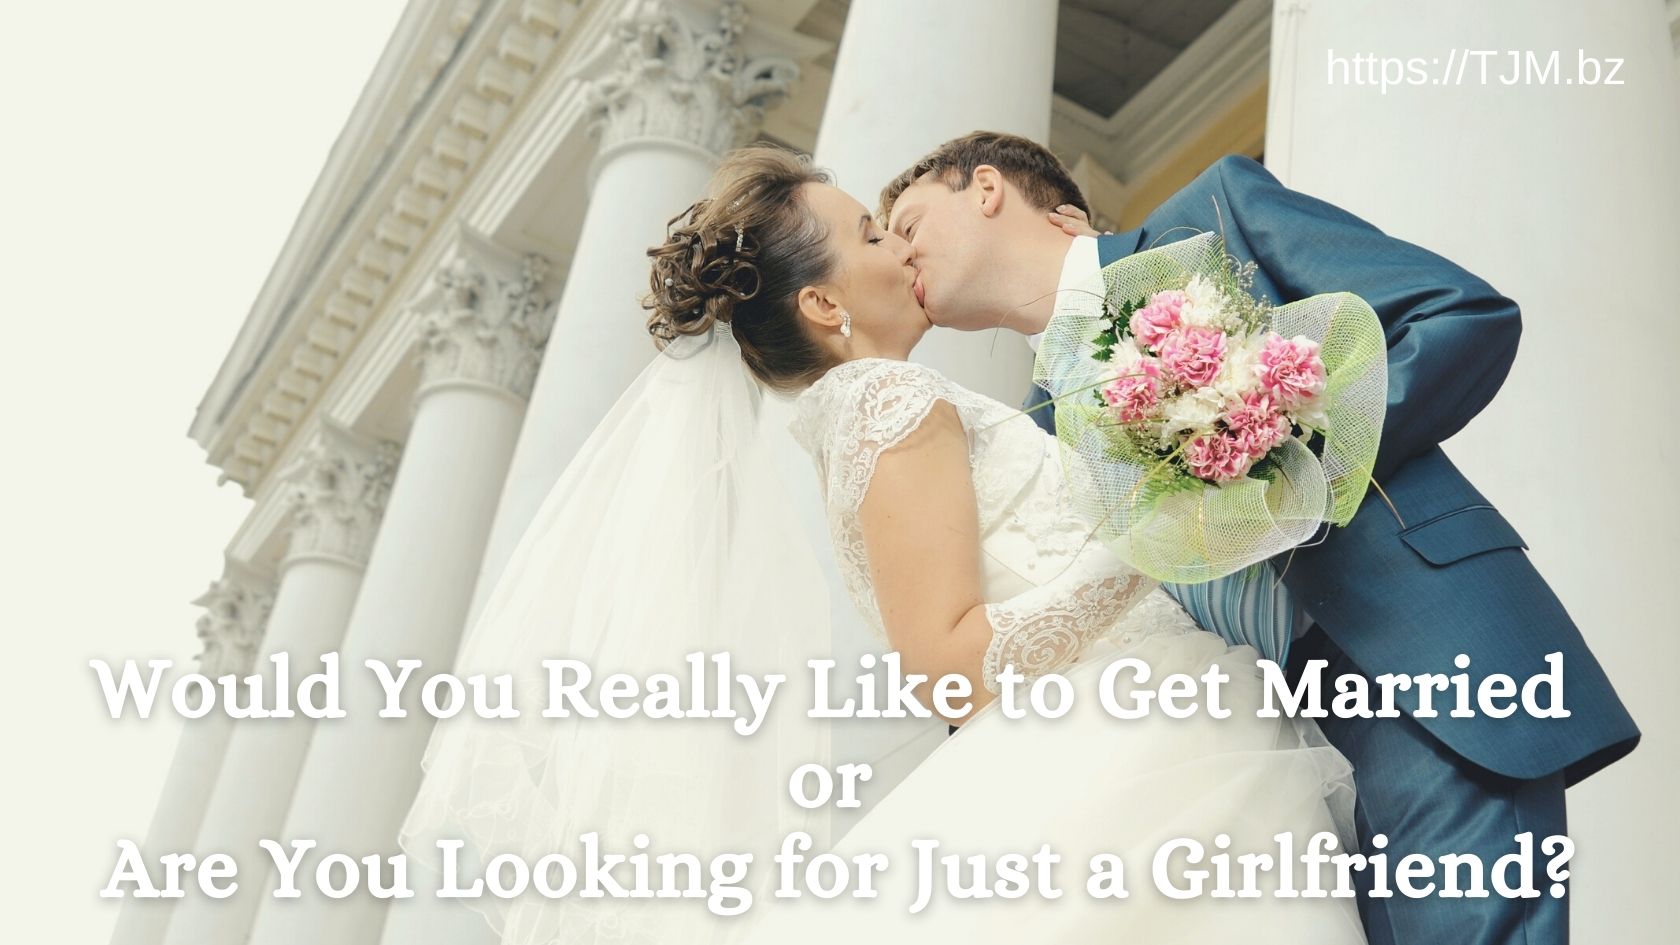 Would You Really Like to Get Married or Are You Looking for Just a Girlfriend?